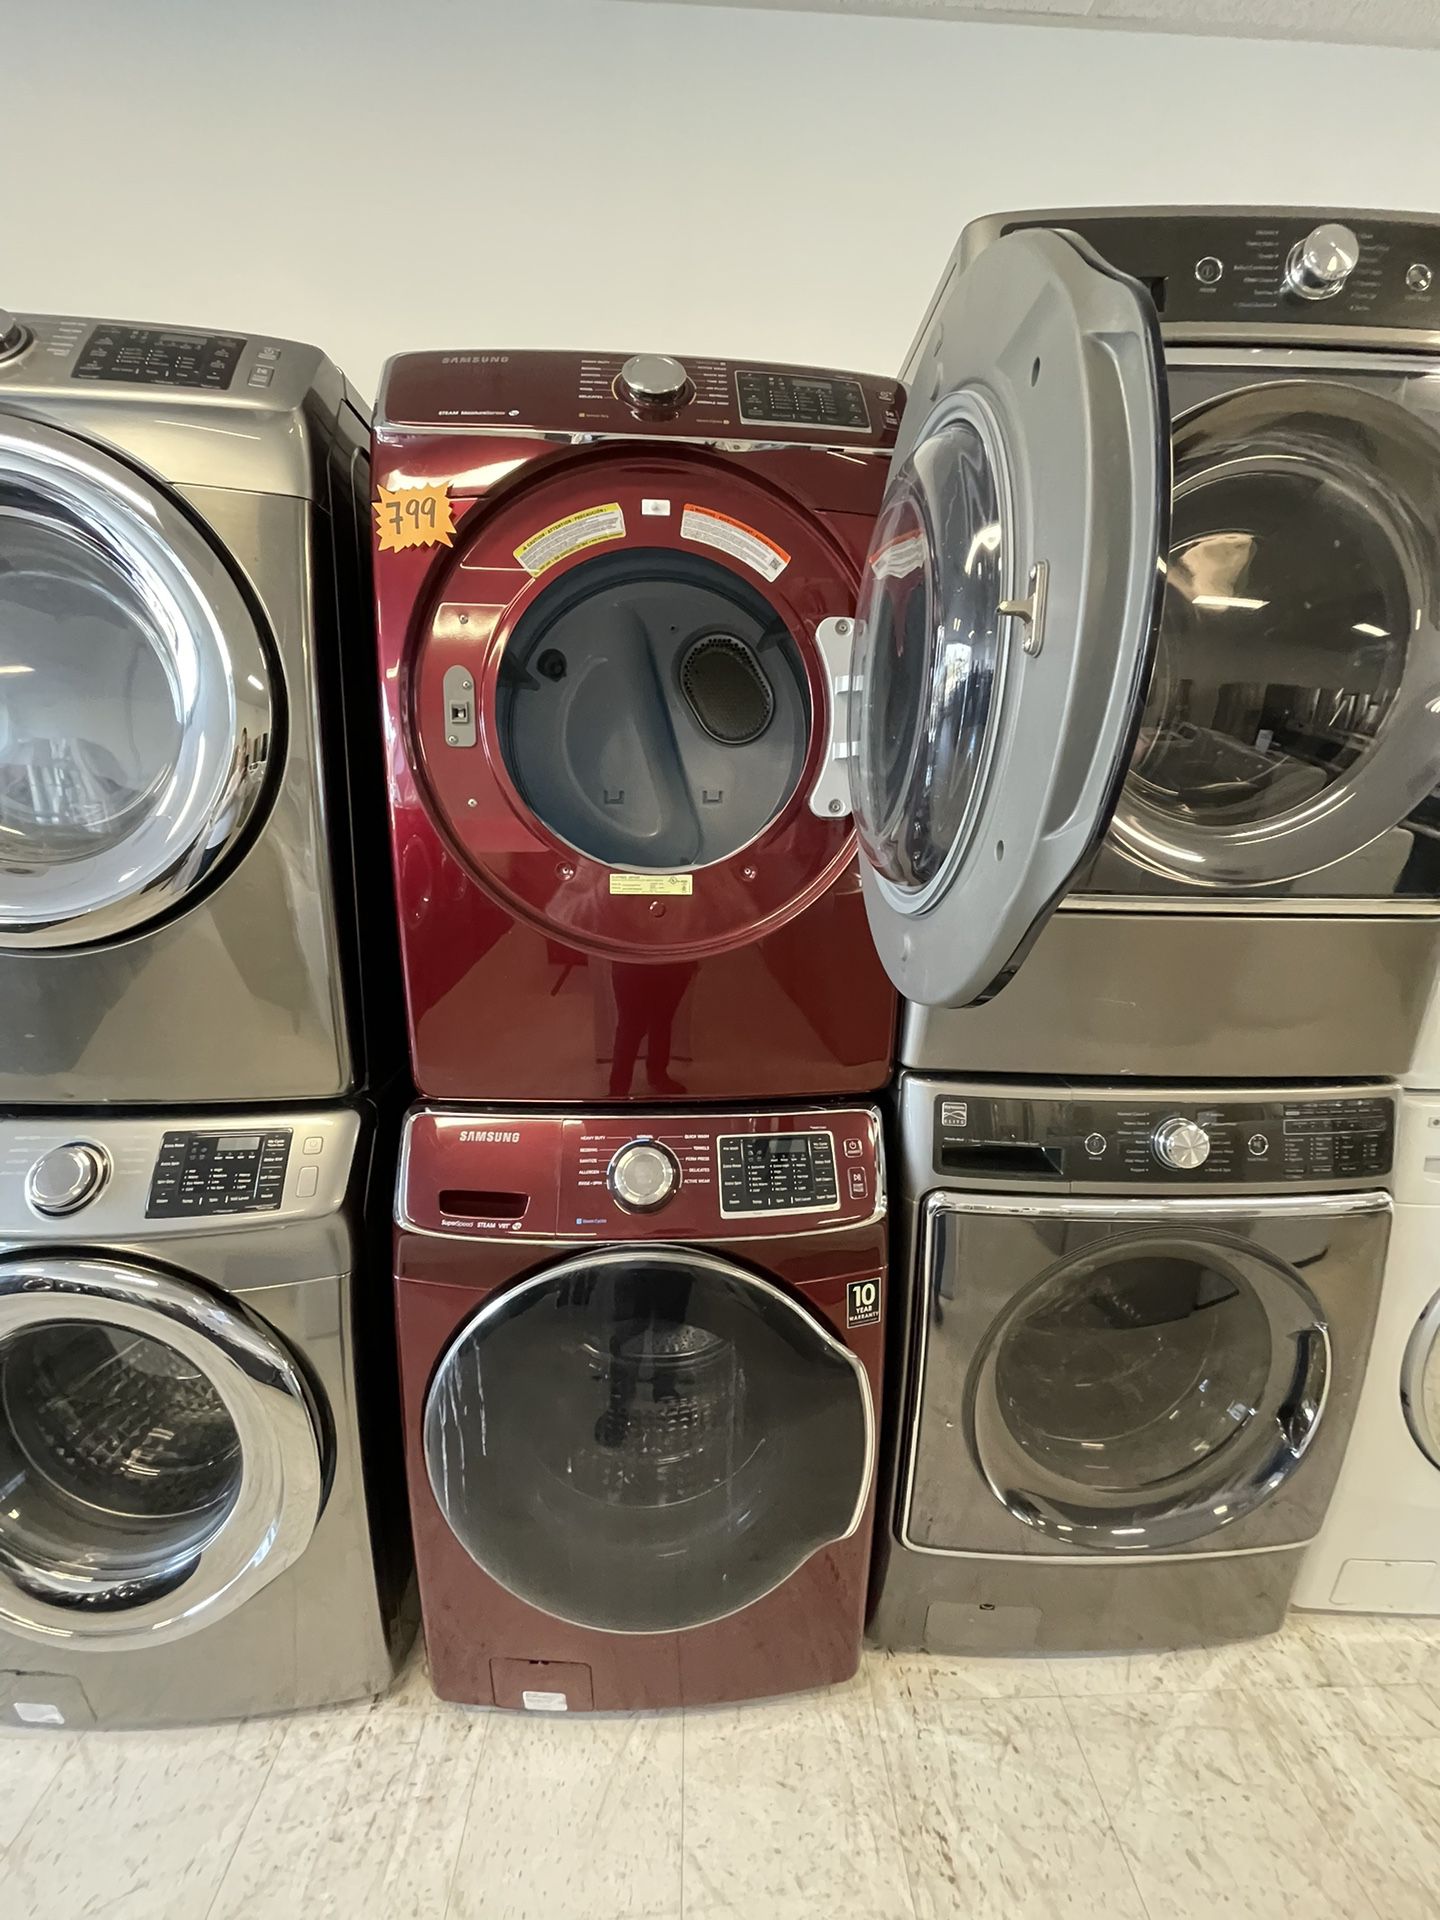 Samsung Front Load Washer And Electric Dryer Set Used Good Condition With 90days Warranty 